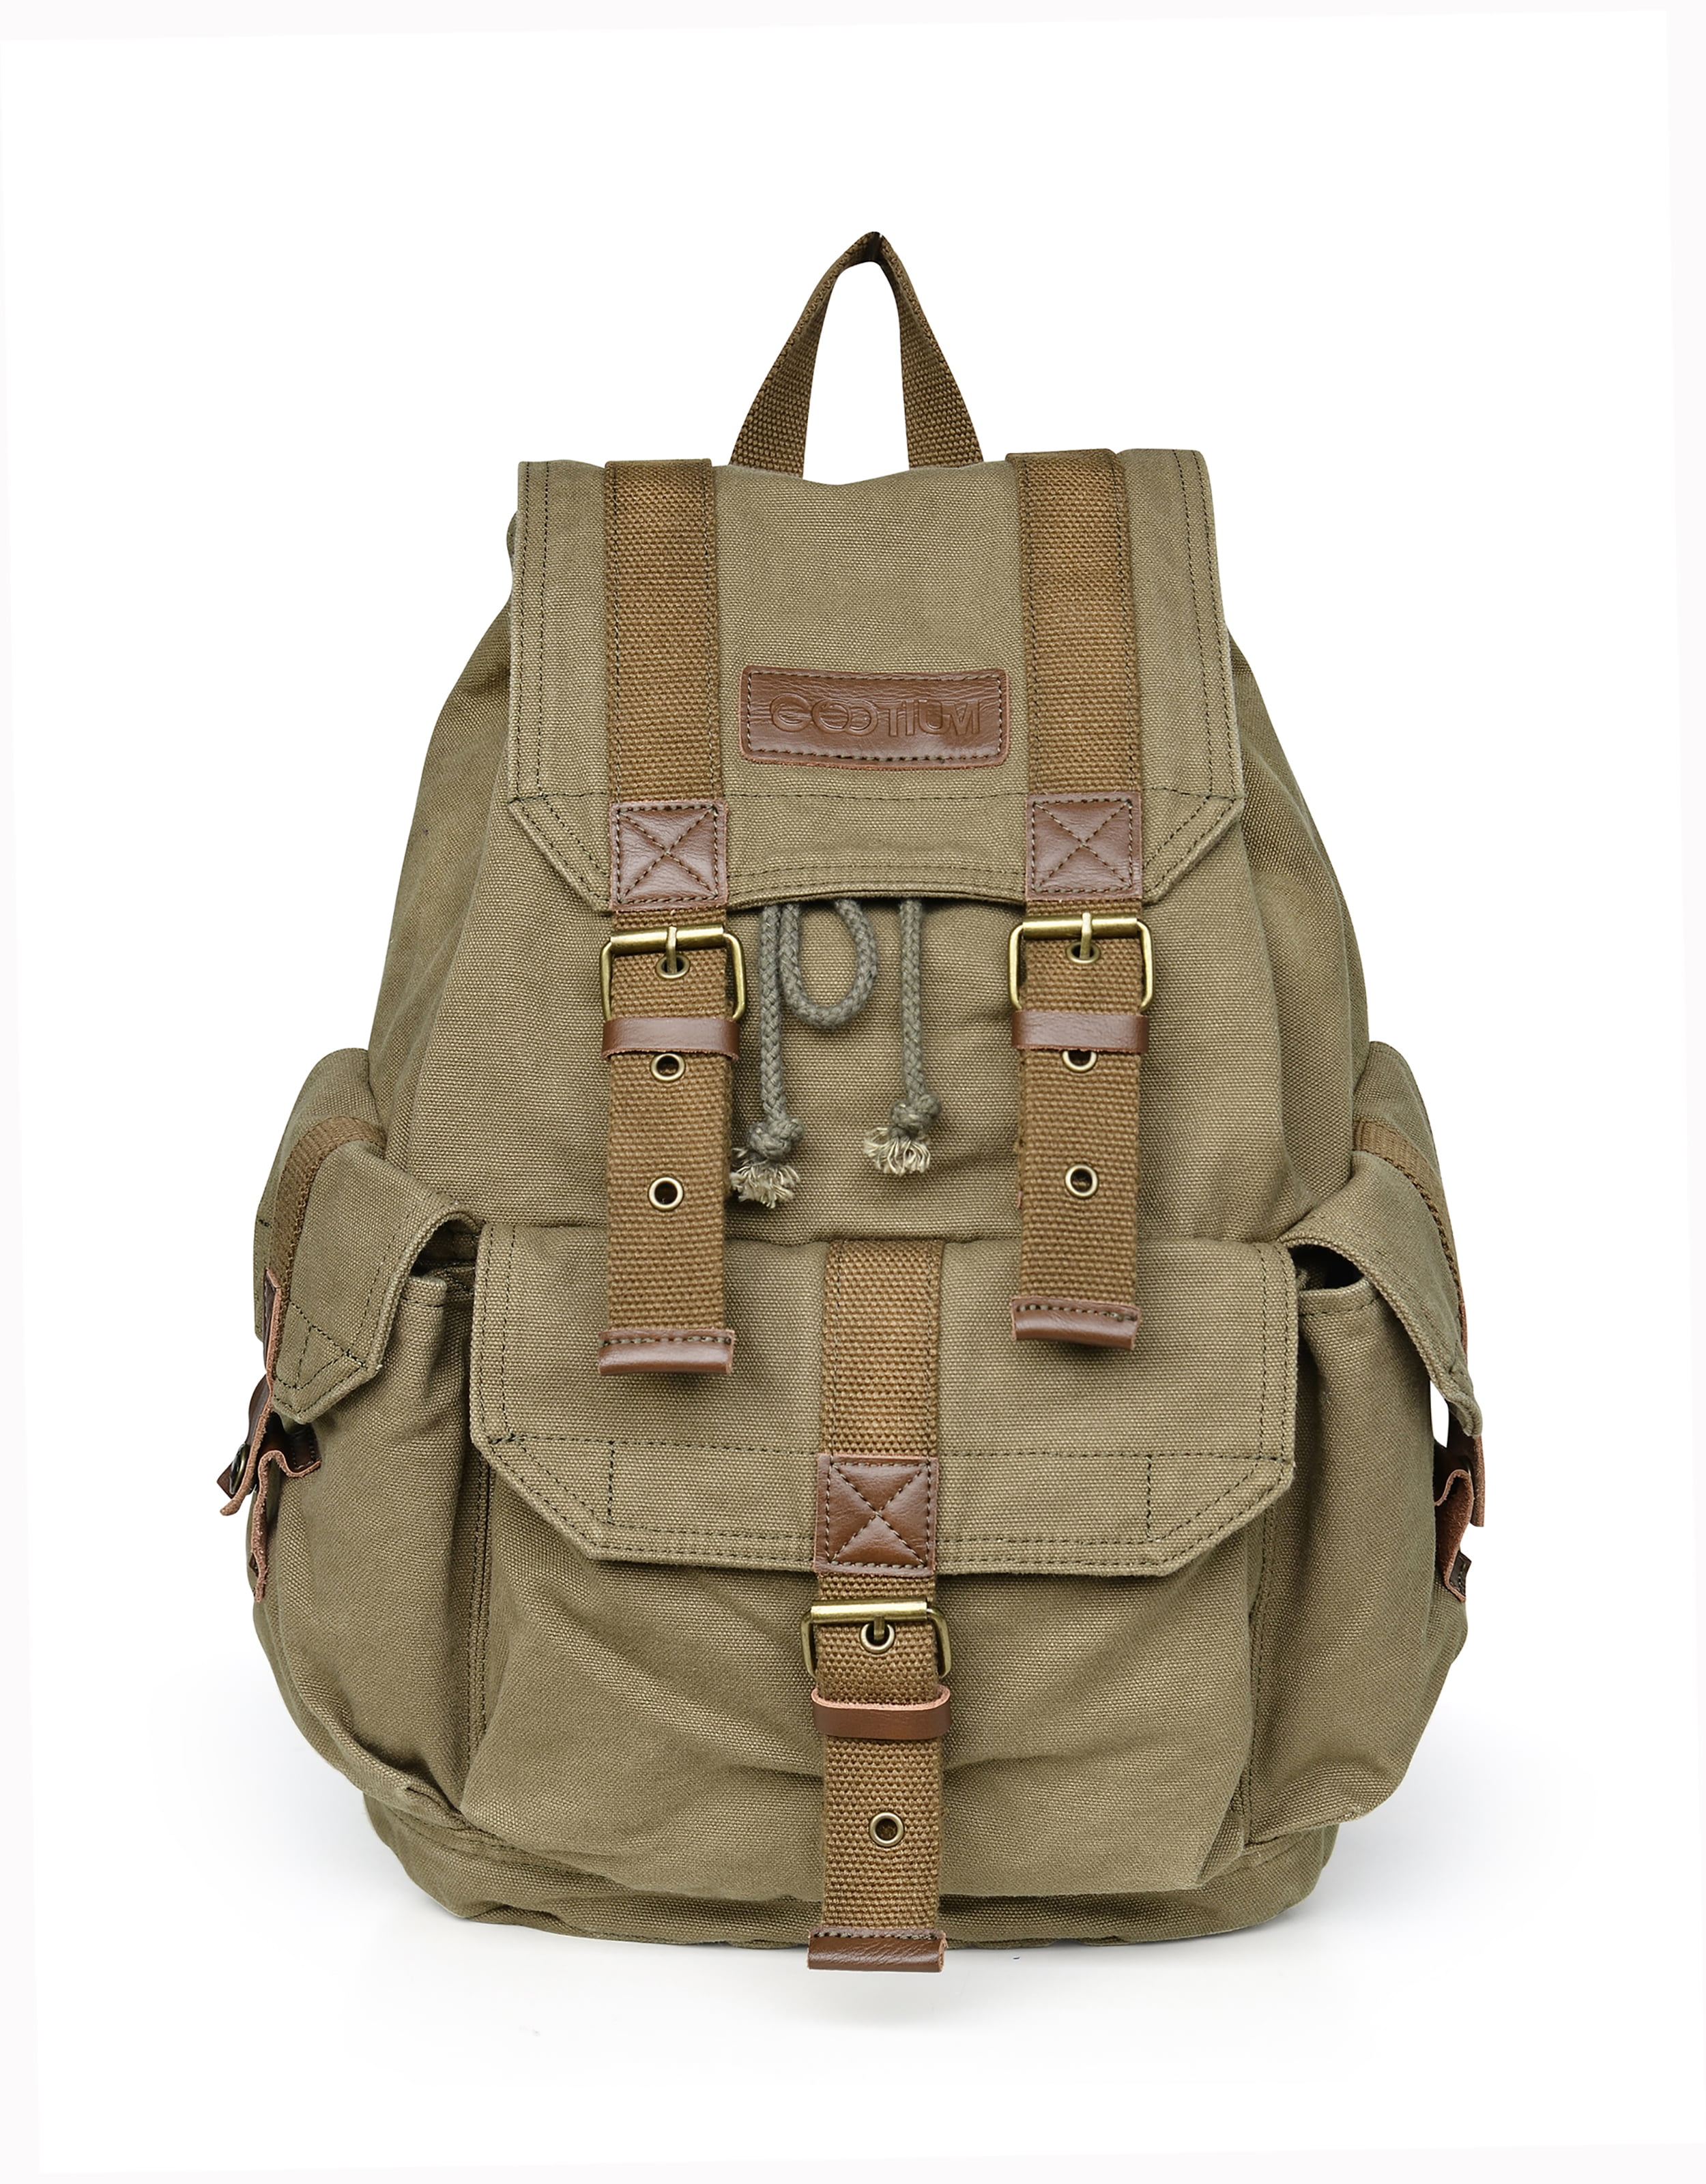 Swiss Tough Vintage Alpine Leather and Rubberized Canvas Rucksack Backpack